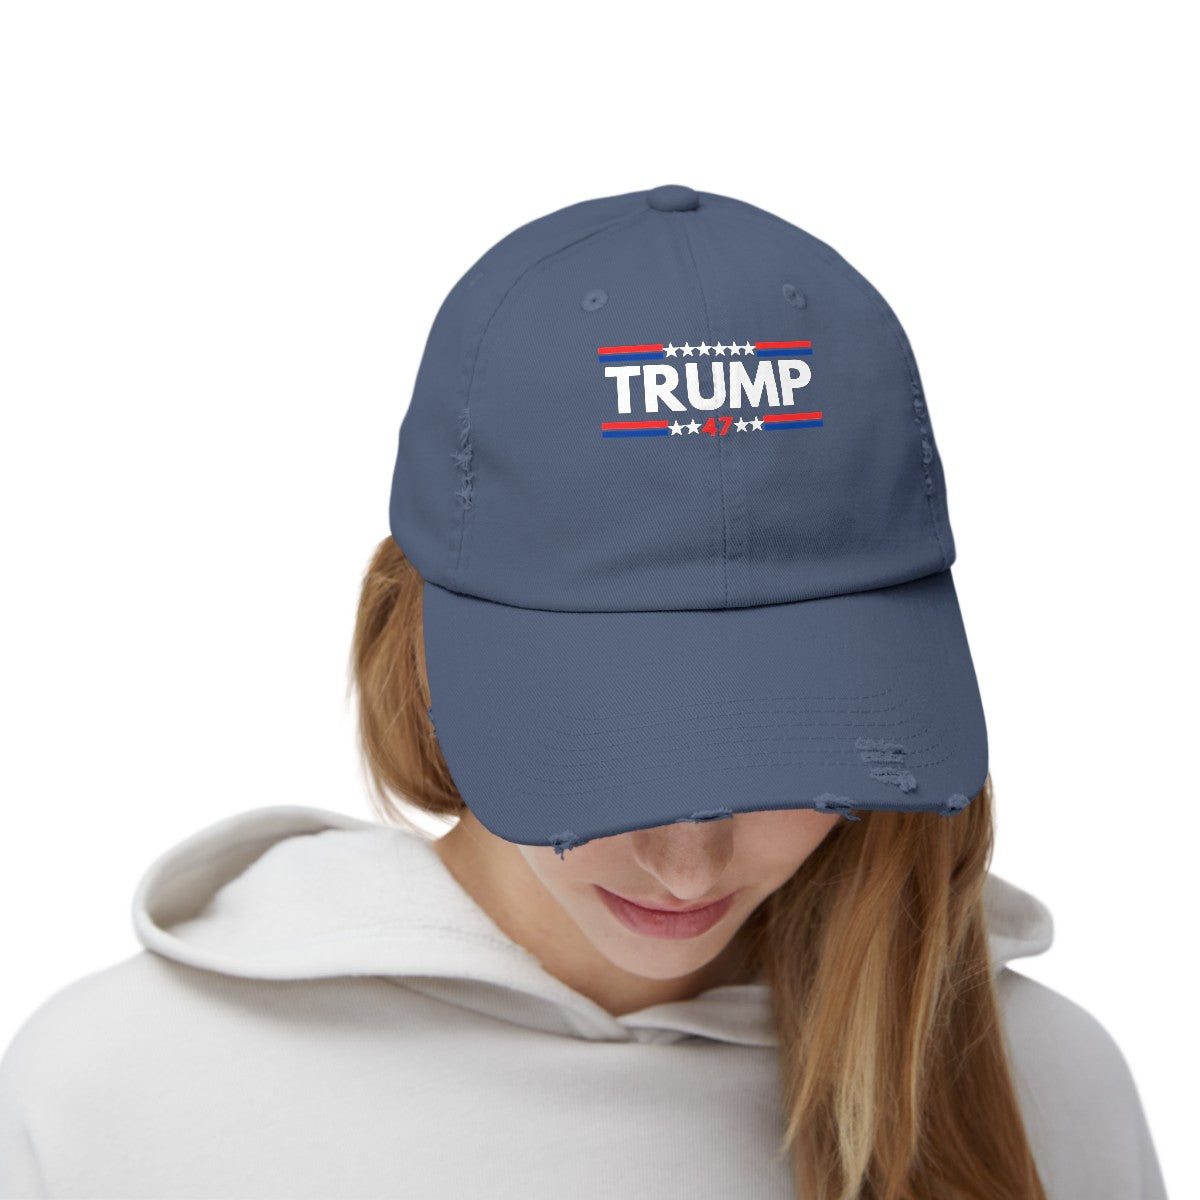 Get trendy with Trump #47 President  Cap -  available at Good Gift Company. Grab yours for $21.98 today!